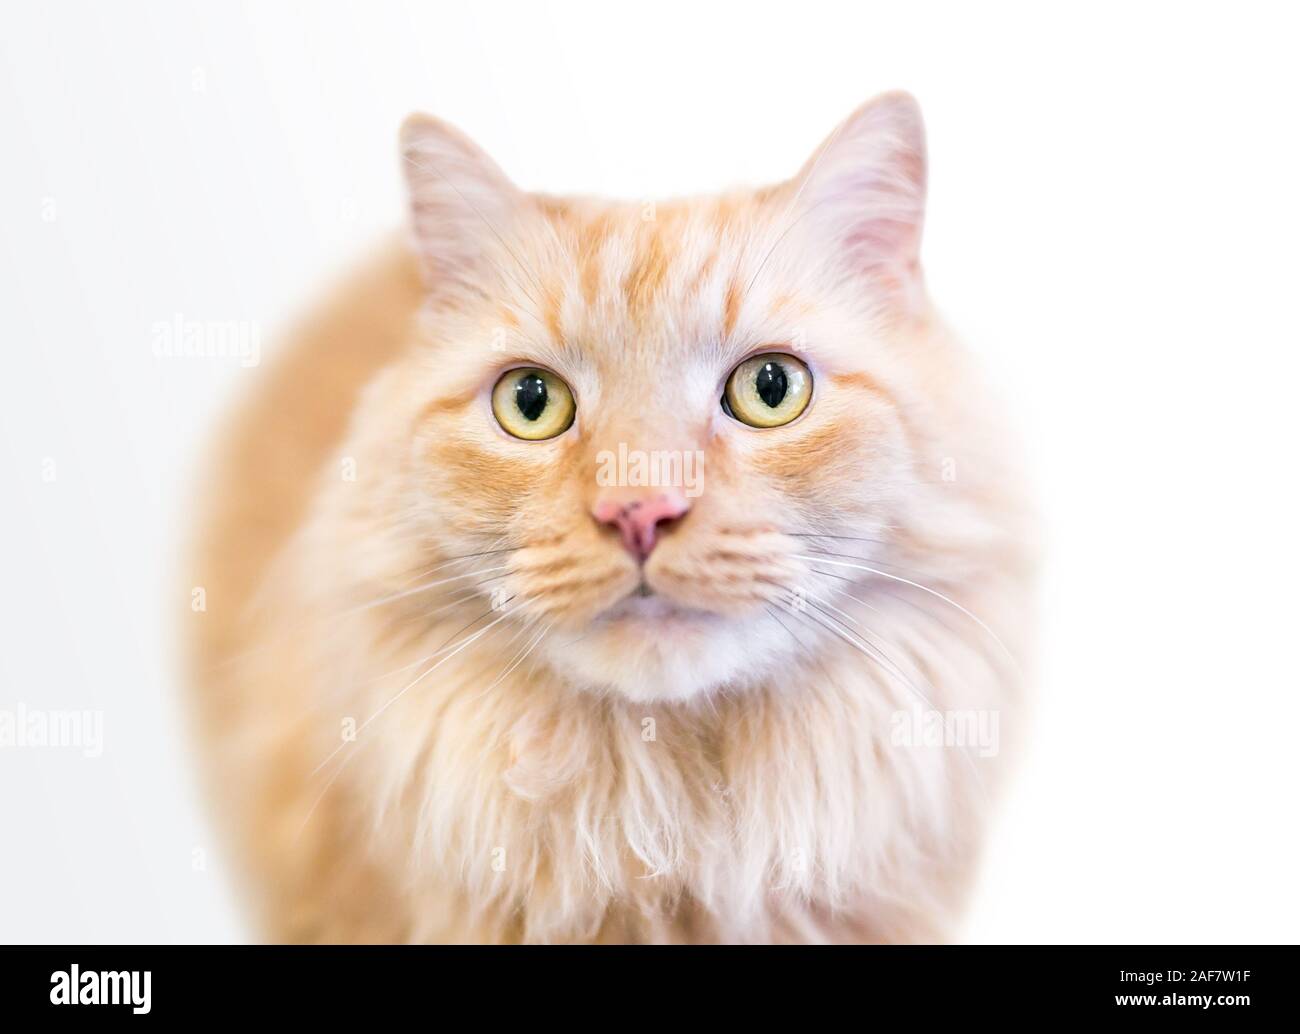 A fluffy orange tabby domestic longhair cat with freckles on its nose Stock Photo